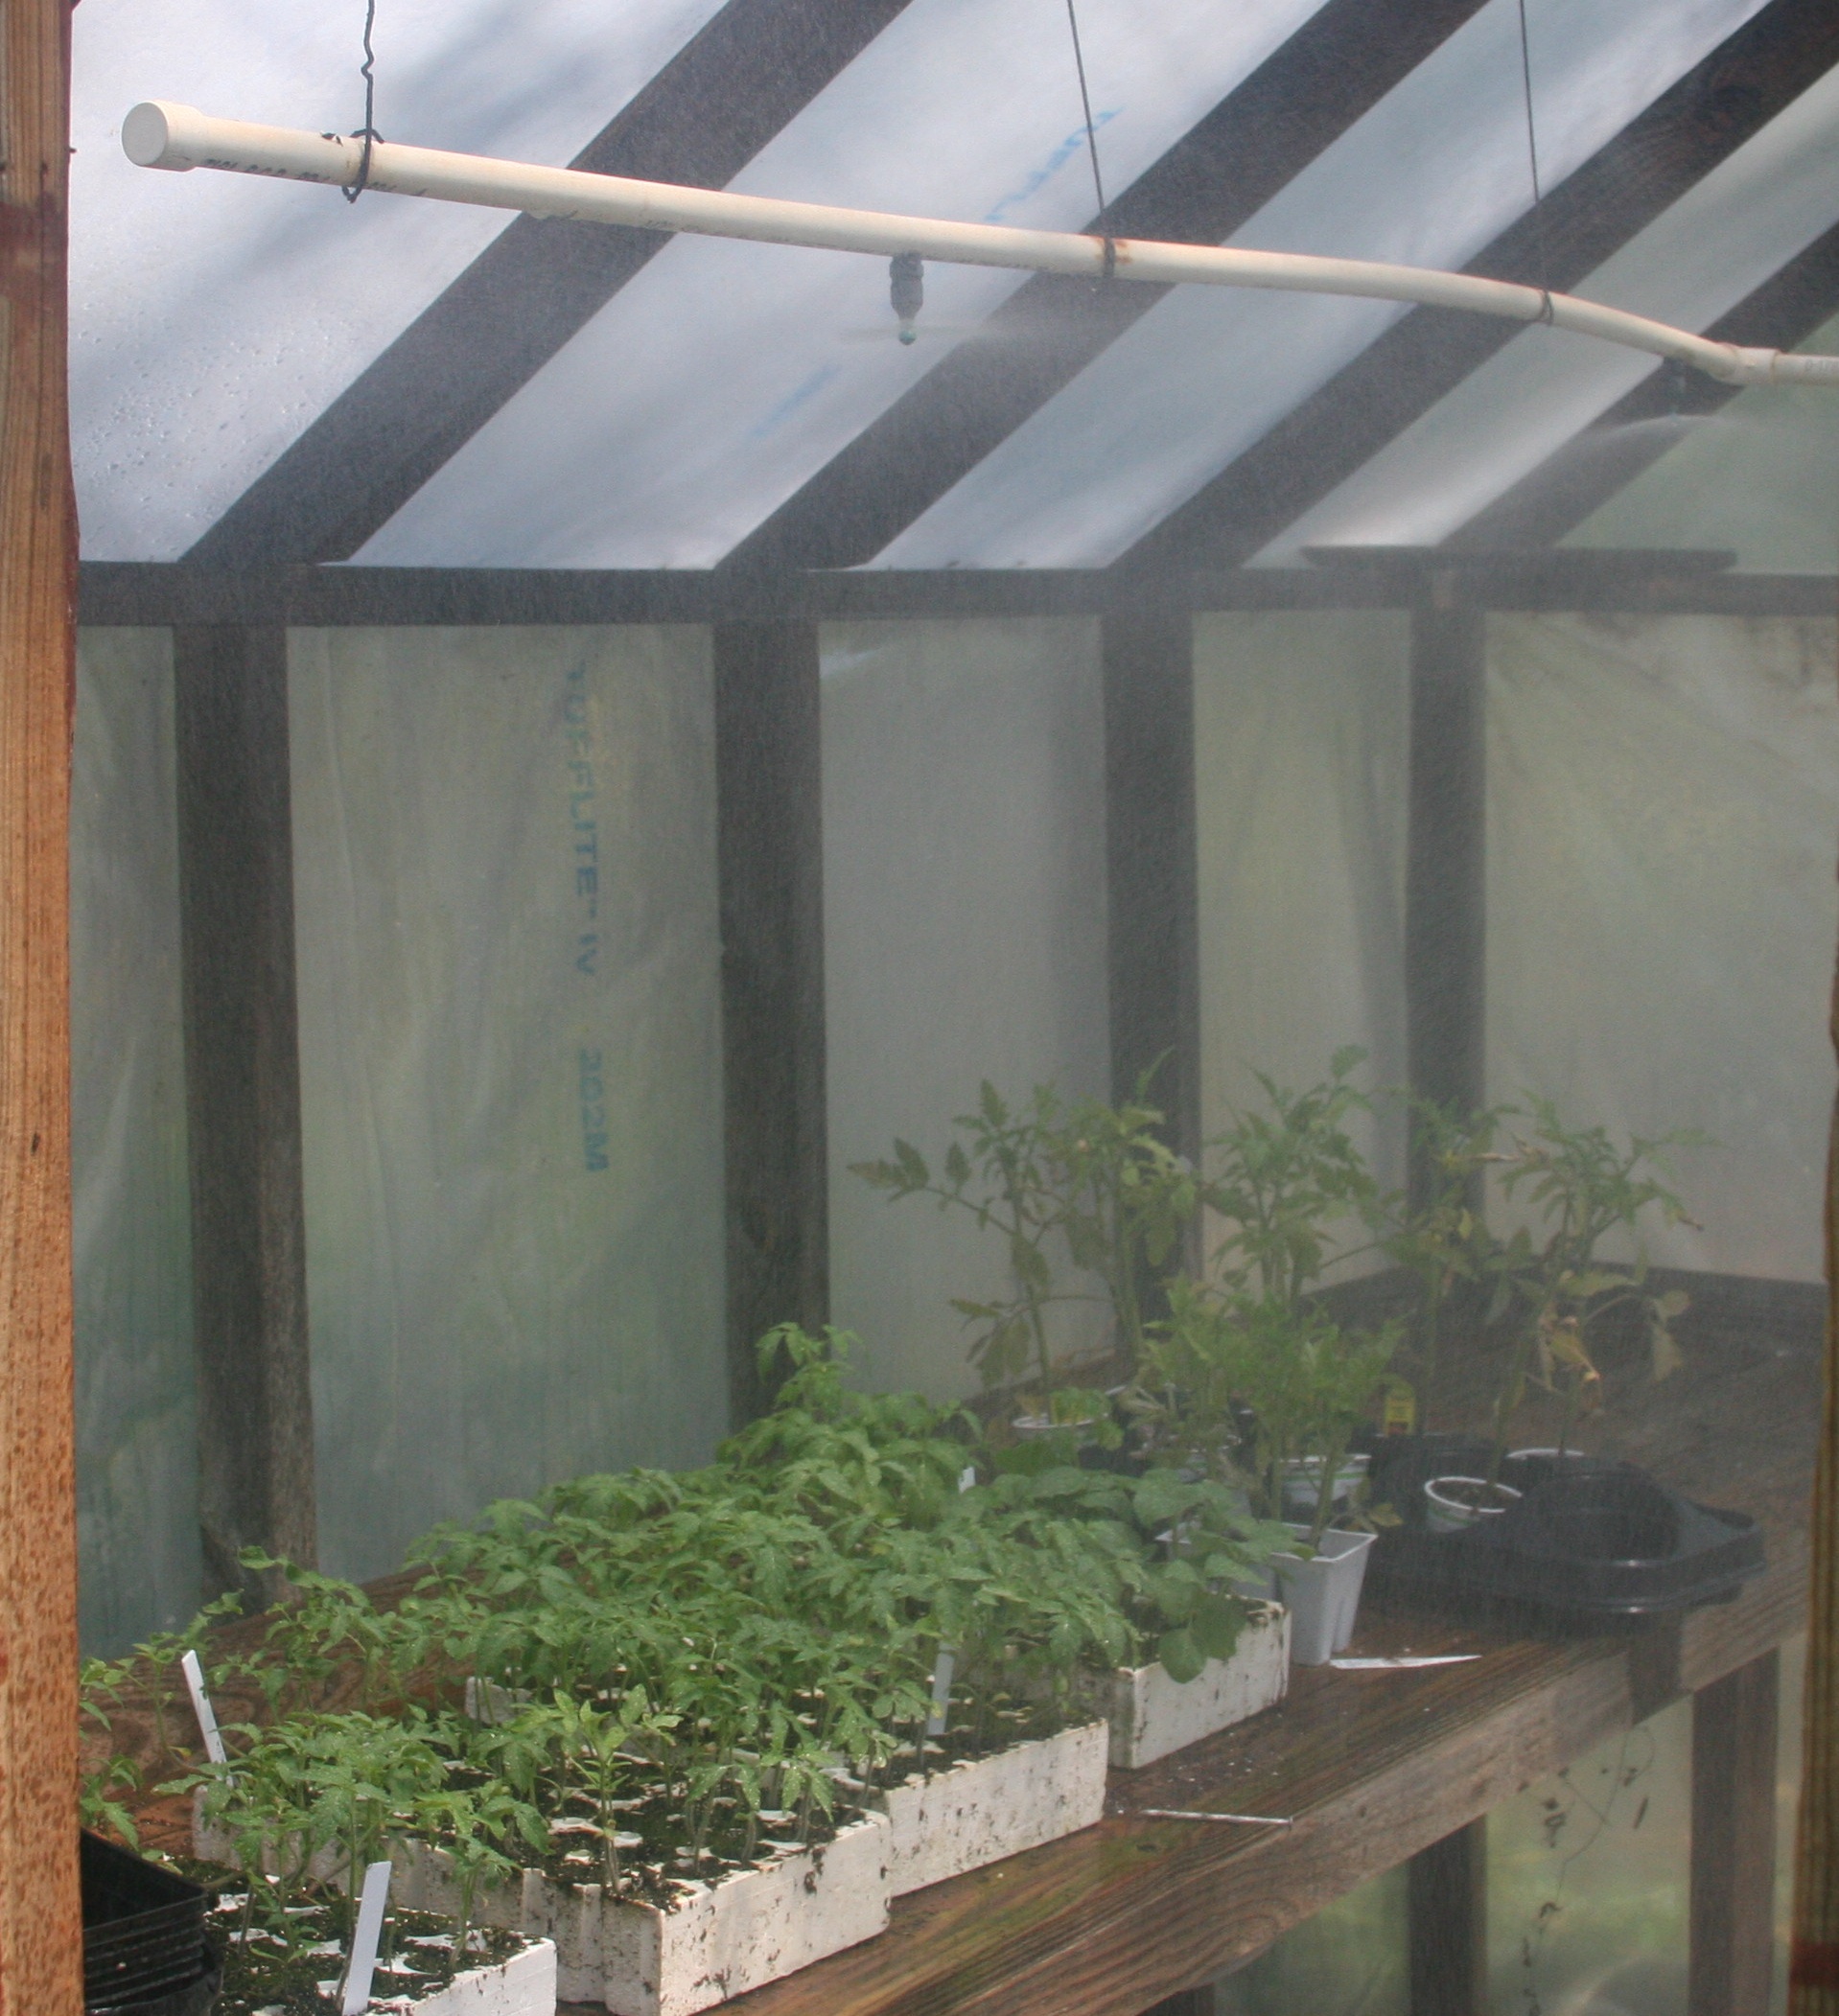 PVC pipe converted into a hobby greenhouse misting system